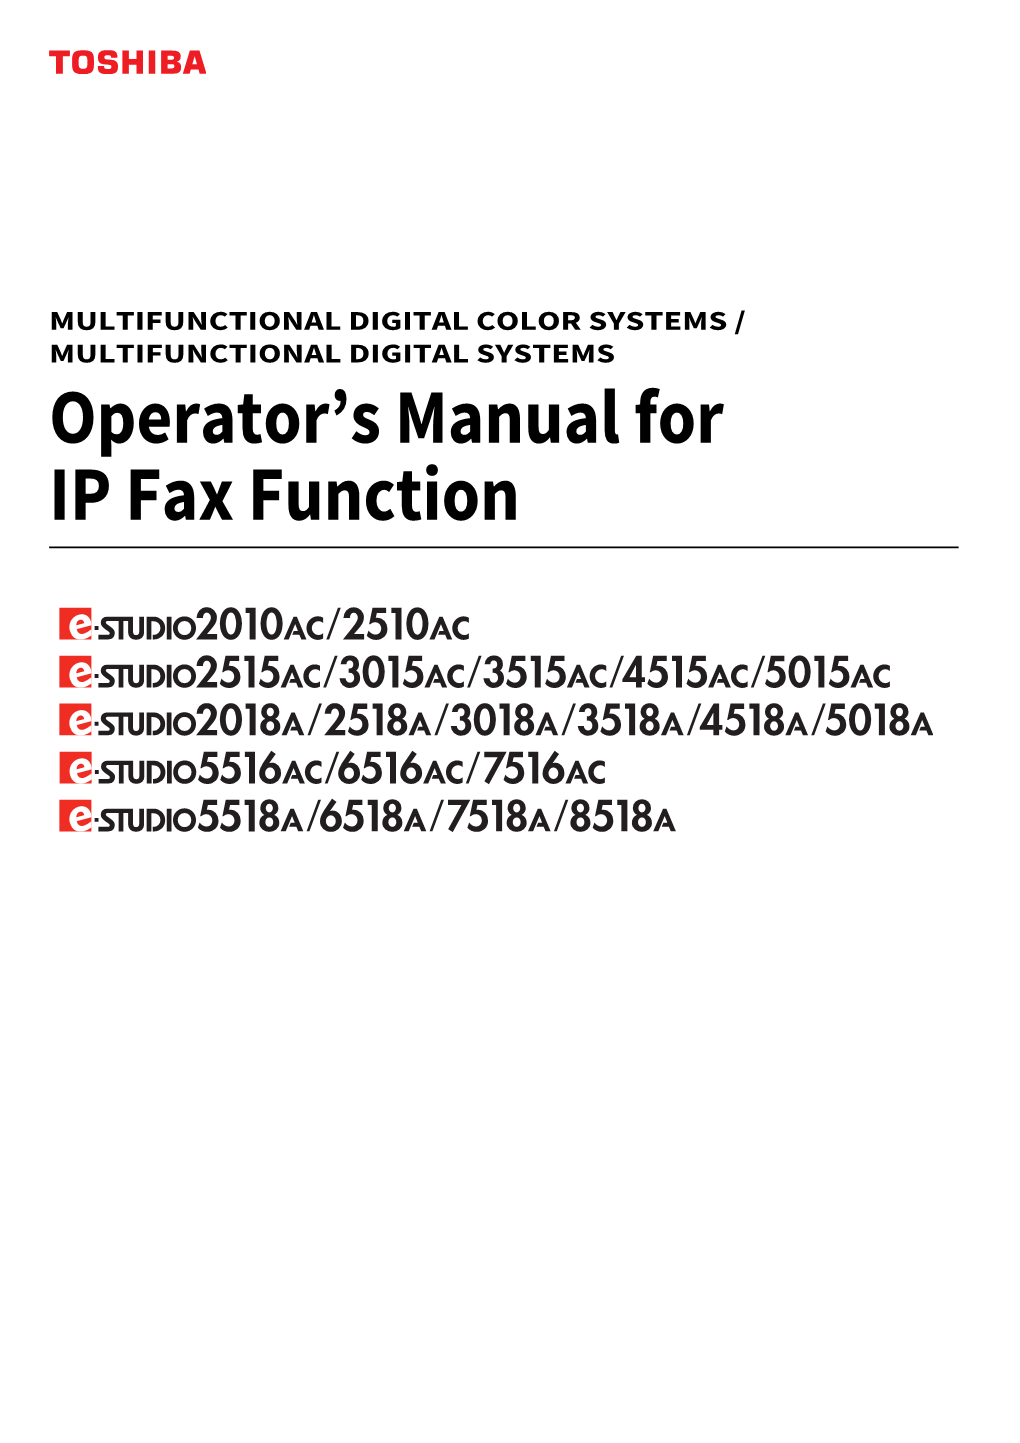 Operator's Manual for IP Fax Function